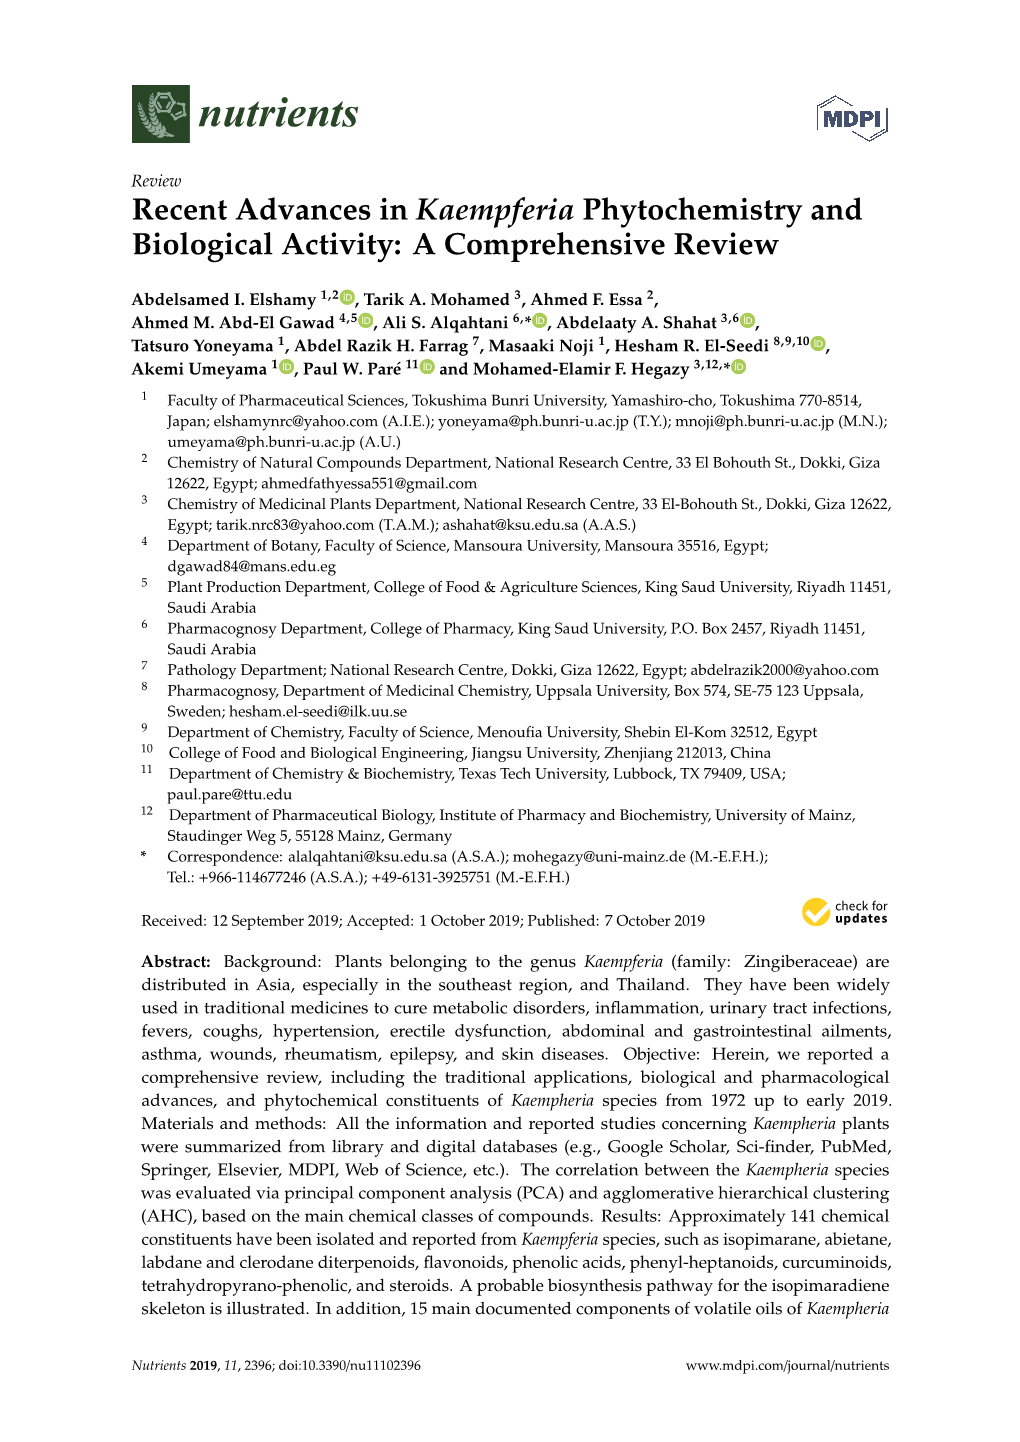 Recent Advances in Kaempferia Phytochemistry and Biological Activity: a Comprehensive Review